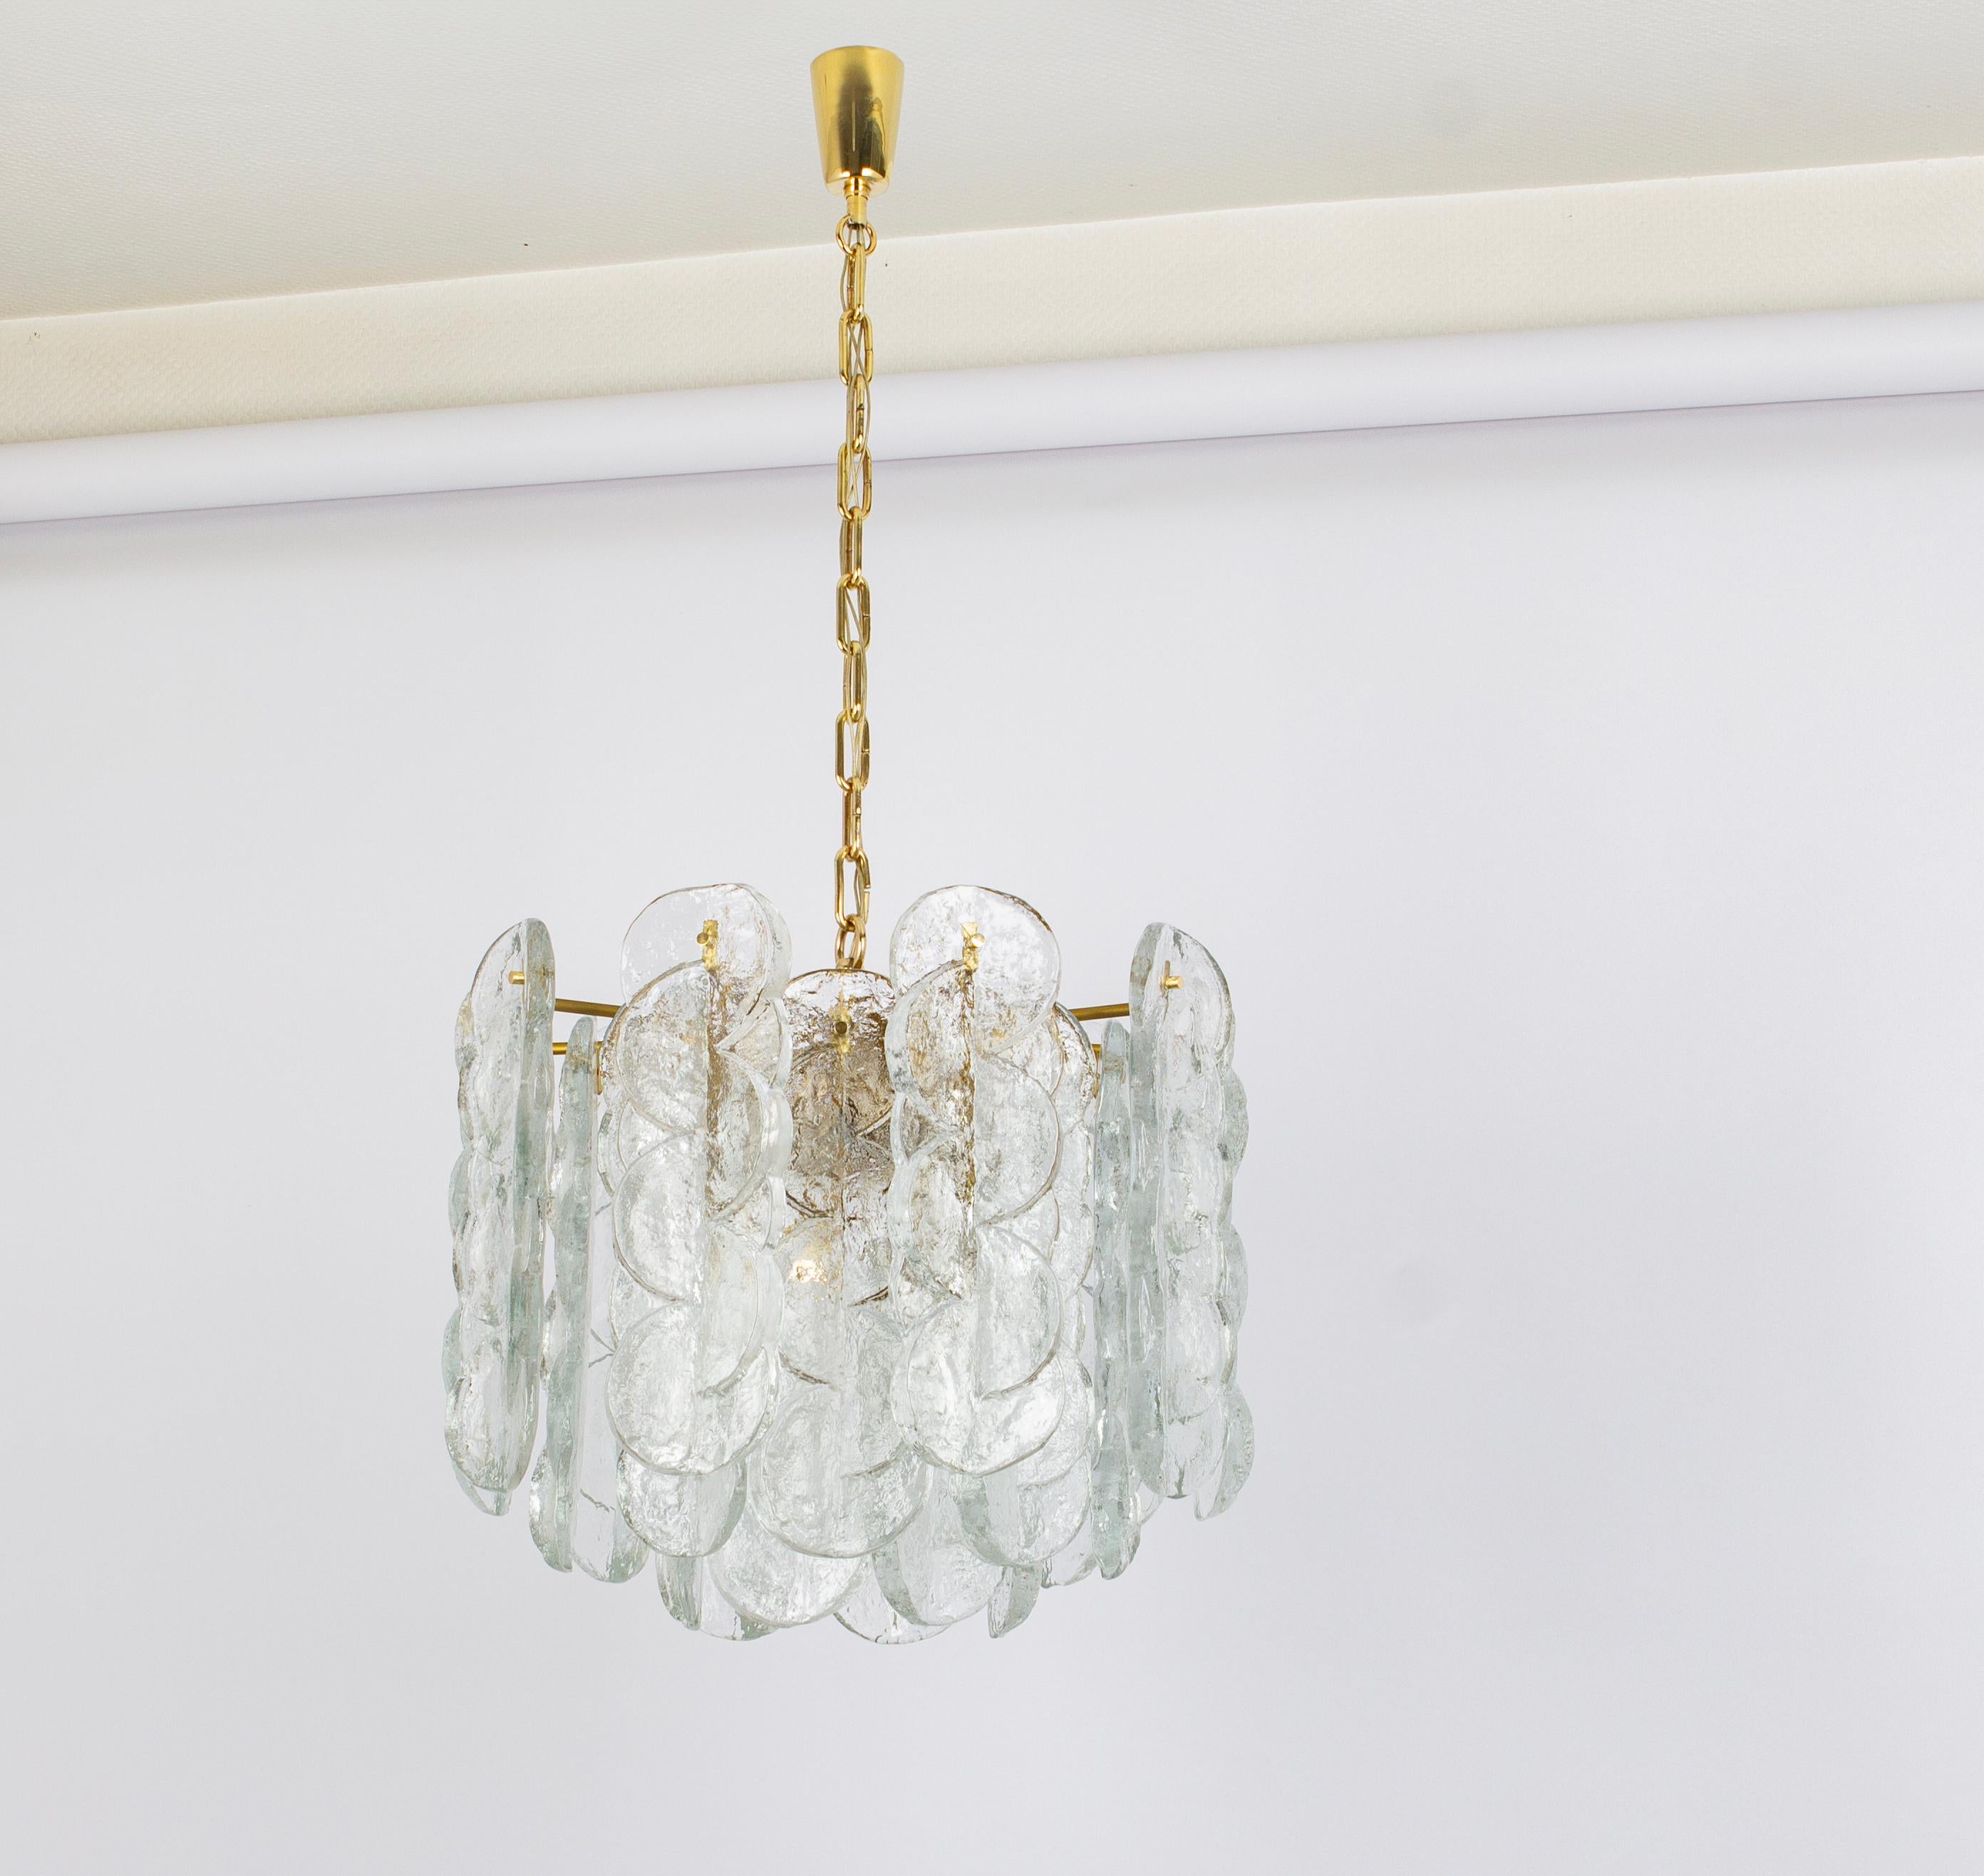 Wonderful Murano glass chandelier by Kalmar, 1970s
Swirl ice glass, clear twisted crystal glass panels on a gold color frame with a brass chain and canopy.
Measures: diameter 19.7